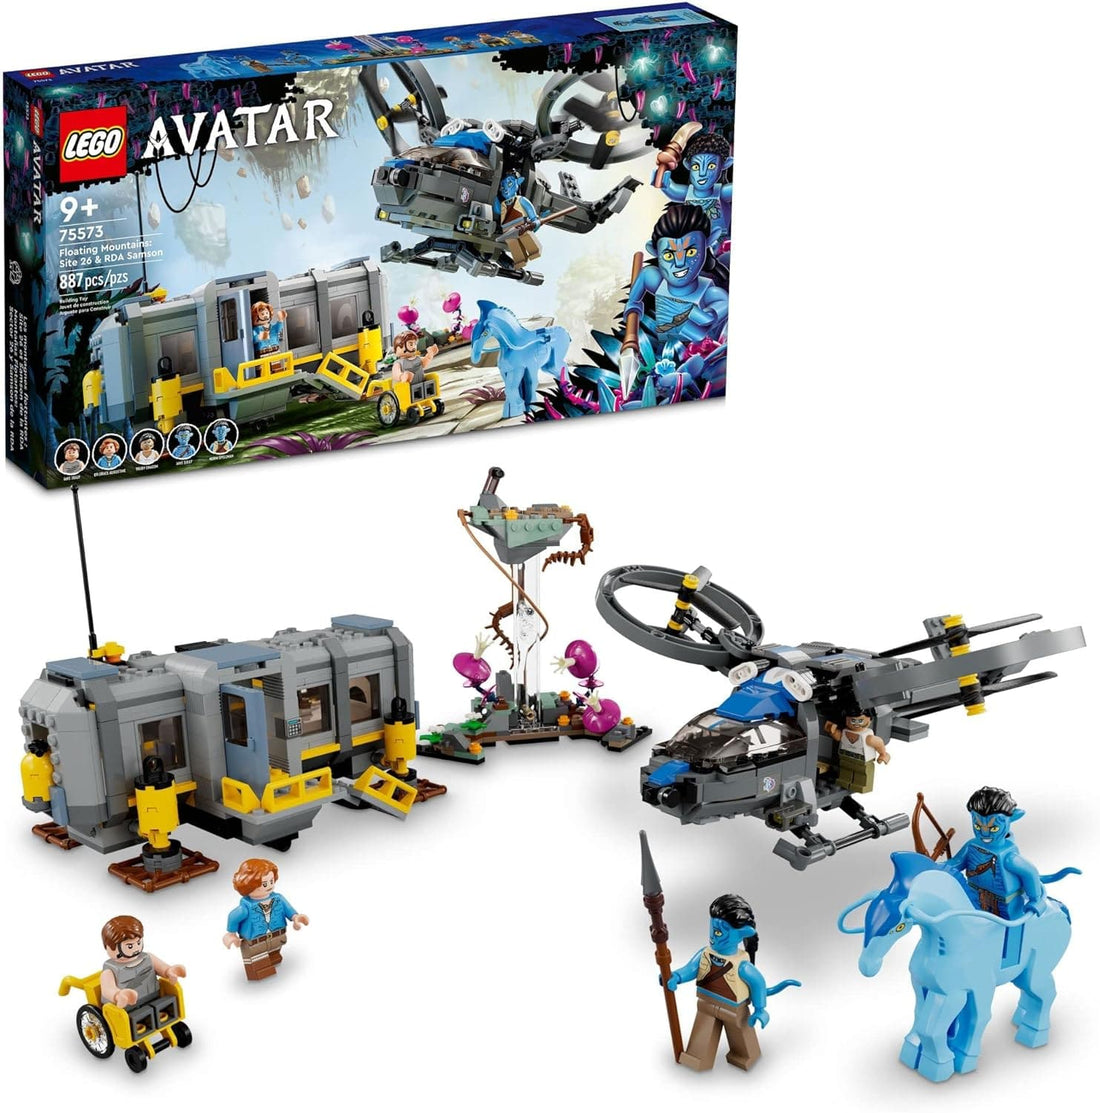 LEGO Avatar Floating Mountains Site 26 & RDA Samson Building Set - Helicopter Toy Featuring 5 Minifigures and Direhorse Animal Figure, Movie Inspired Set - best price from Maltashopper.com 75573